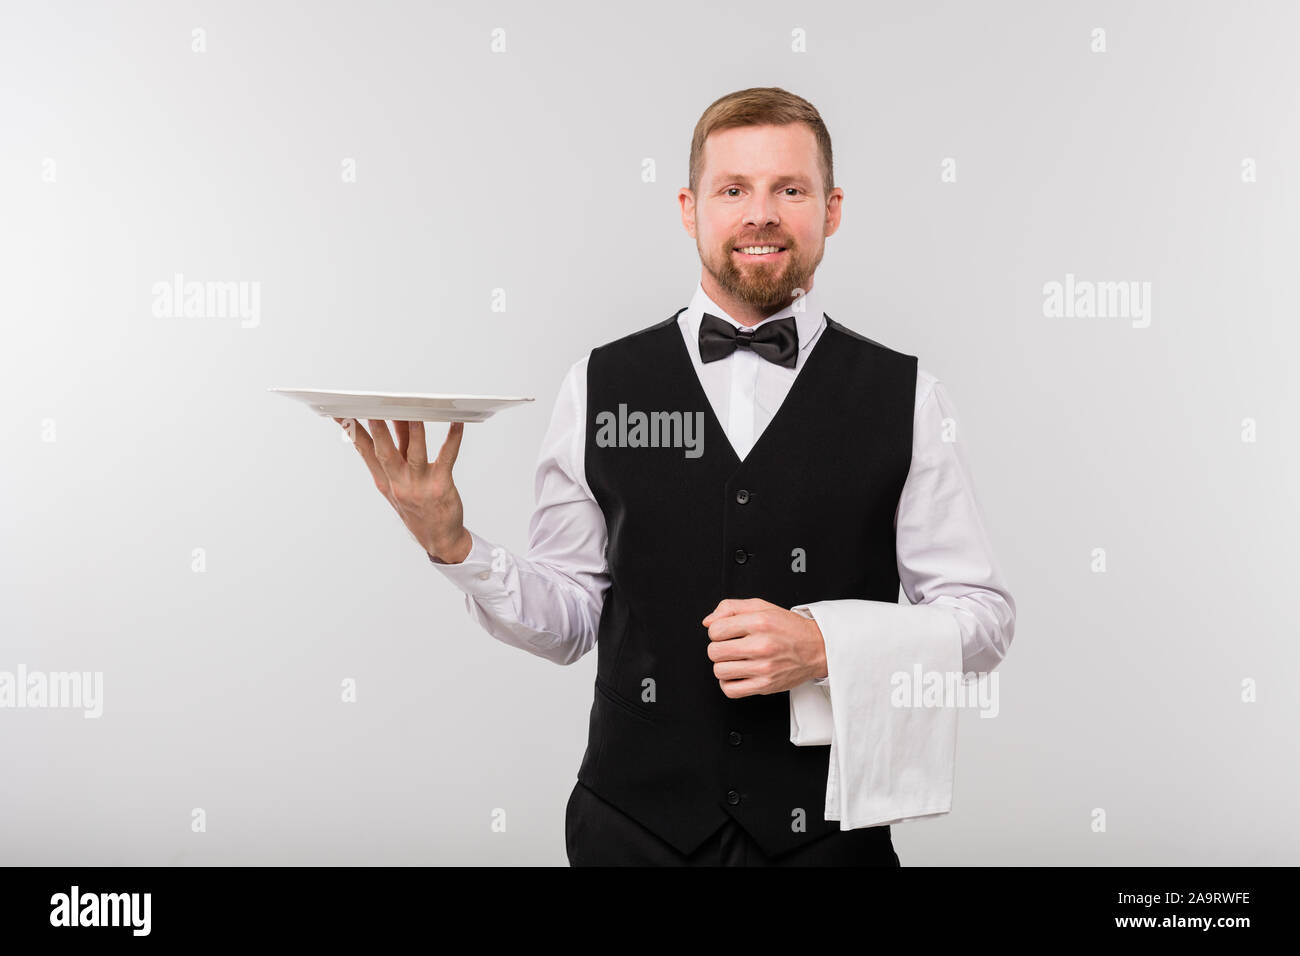 Young elegant waiter in black waistcoat and bowtie holding white towel and plate Stock Photo